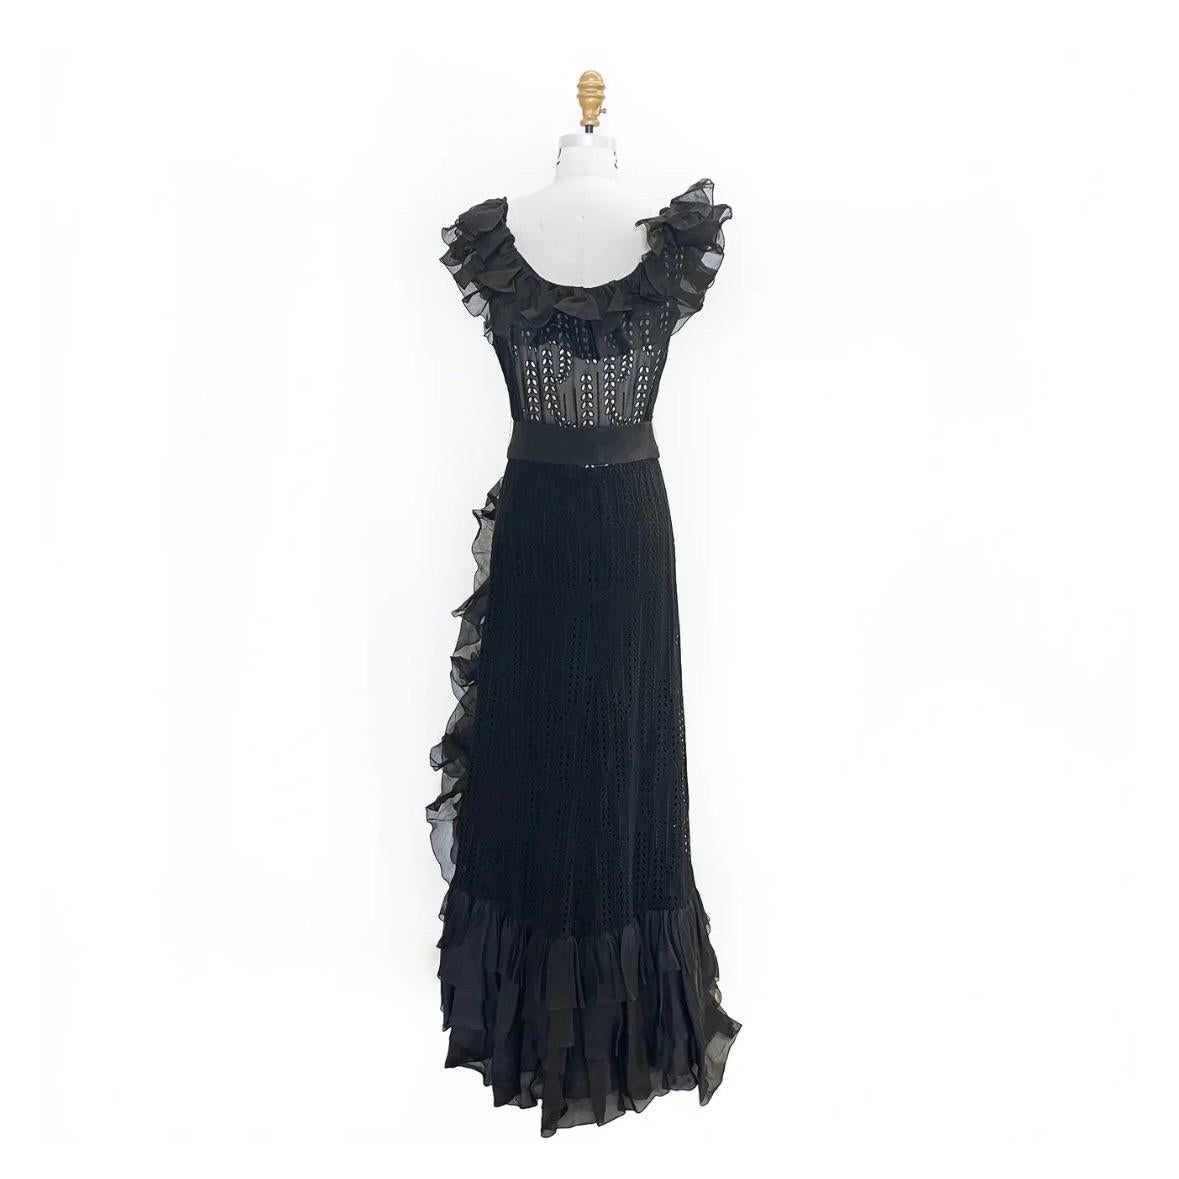 Vintage haute couture eyelet ruffle gown by Chanel
Made in France
1979
Black 
Decorative eyelets throughout fabric
Ribbon bow belt 
Ruffle shoulder straps 
Ruffle detail continues asymmetrically down front wrap seam
Multi-hook closure at bust  
Side